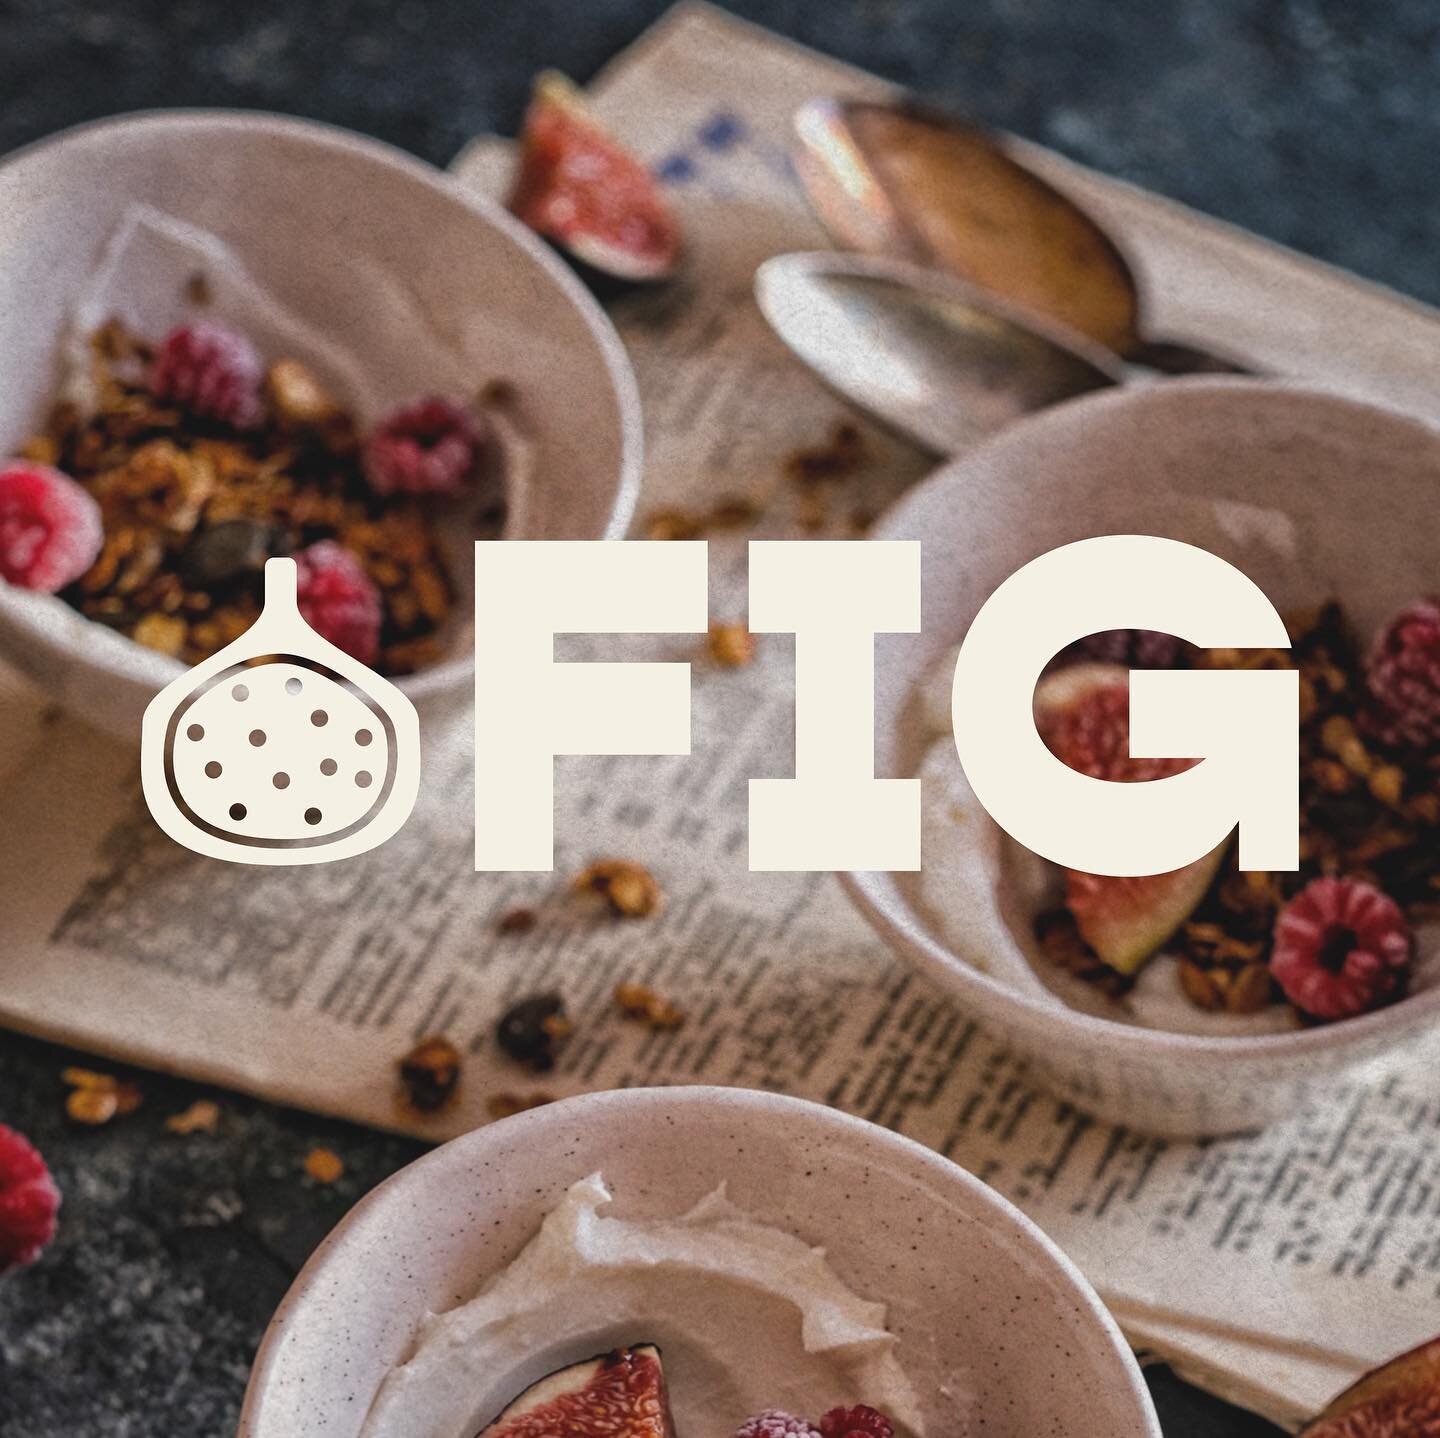 Design slumps often lead to personal projects, inspired by (most of the time) the most random of objects or things. So, after seeing some beautiful shots of figs, here&rsquo;s my interpretation of how figs would brand themselves. 

#brand #branding #